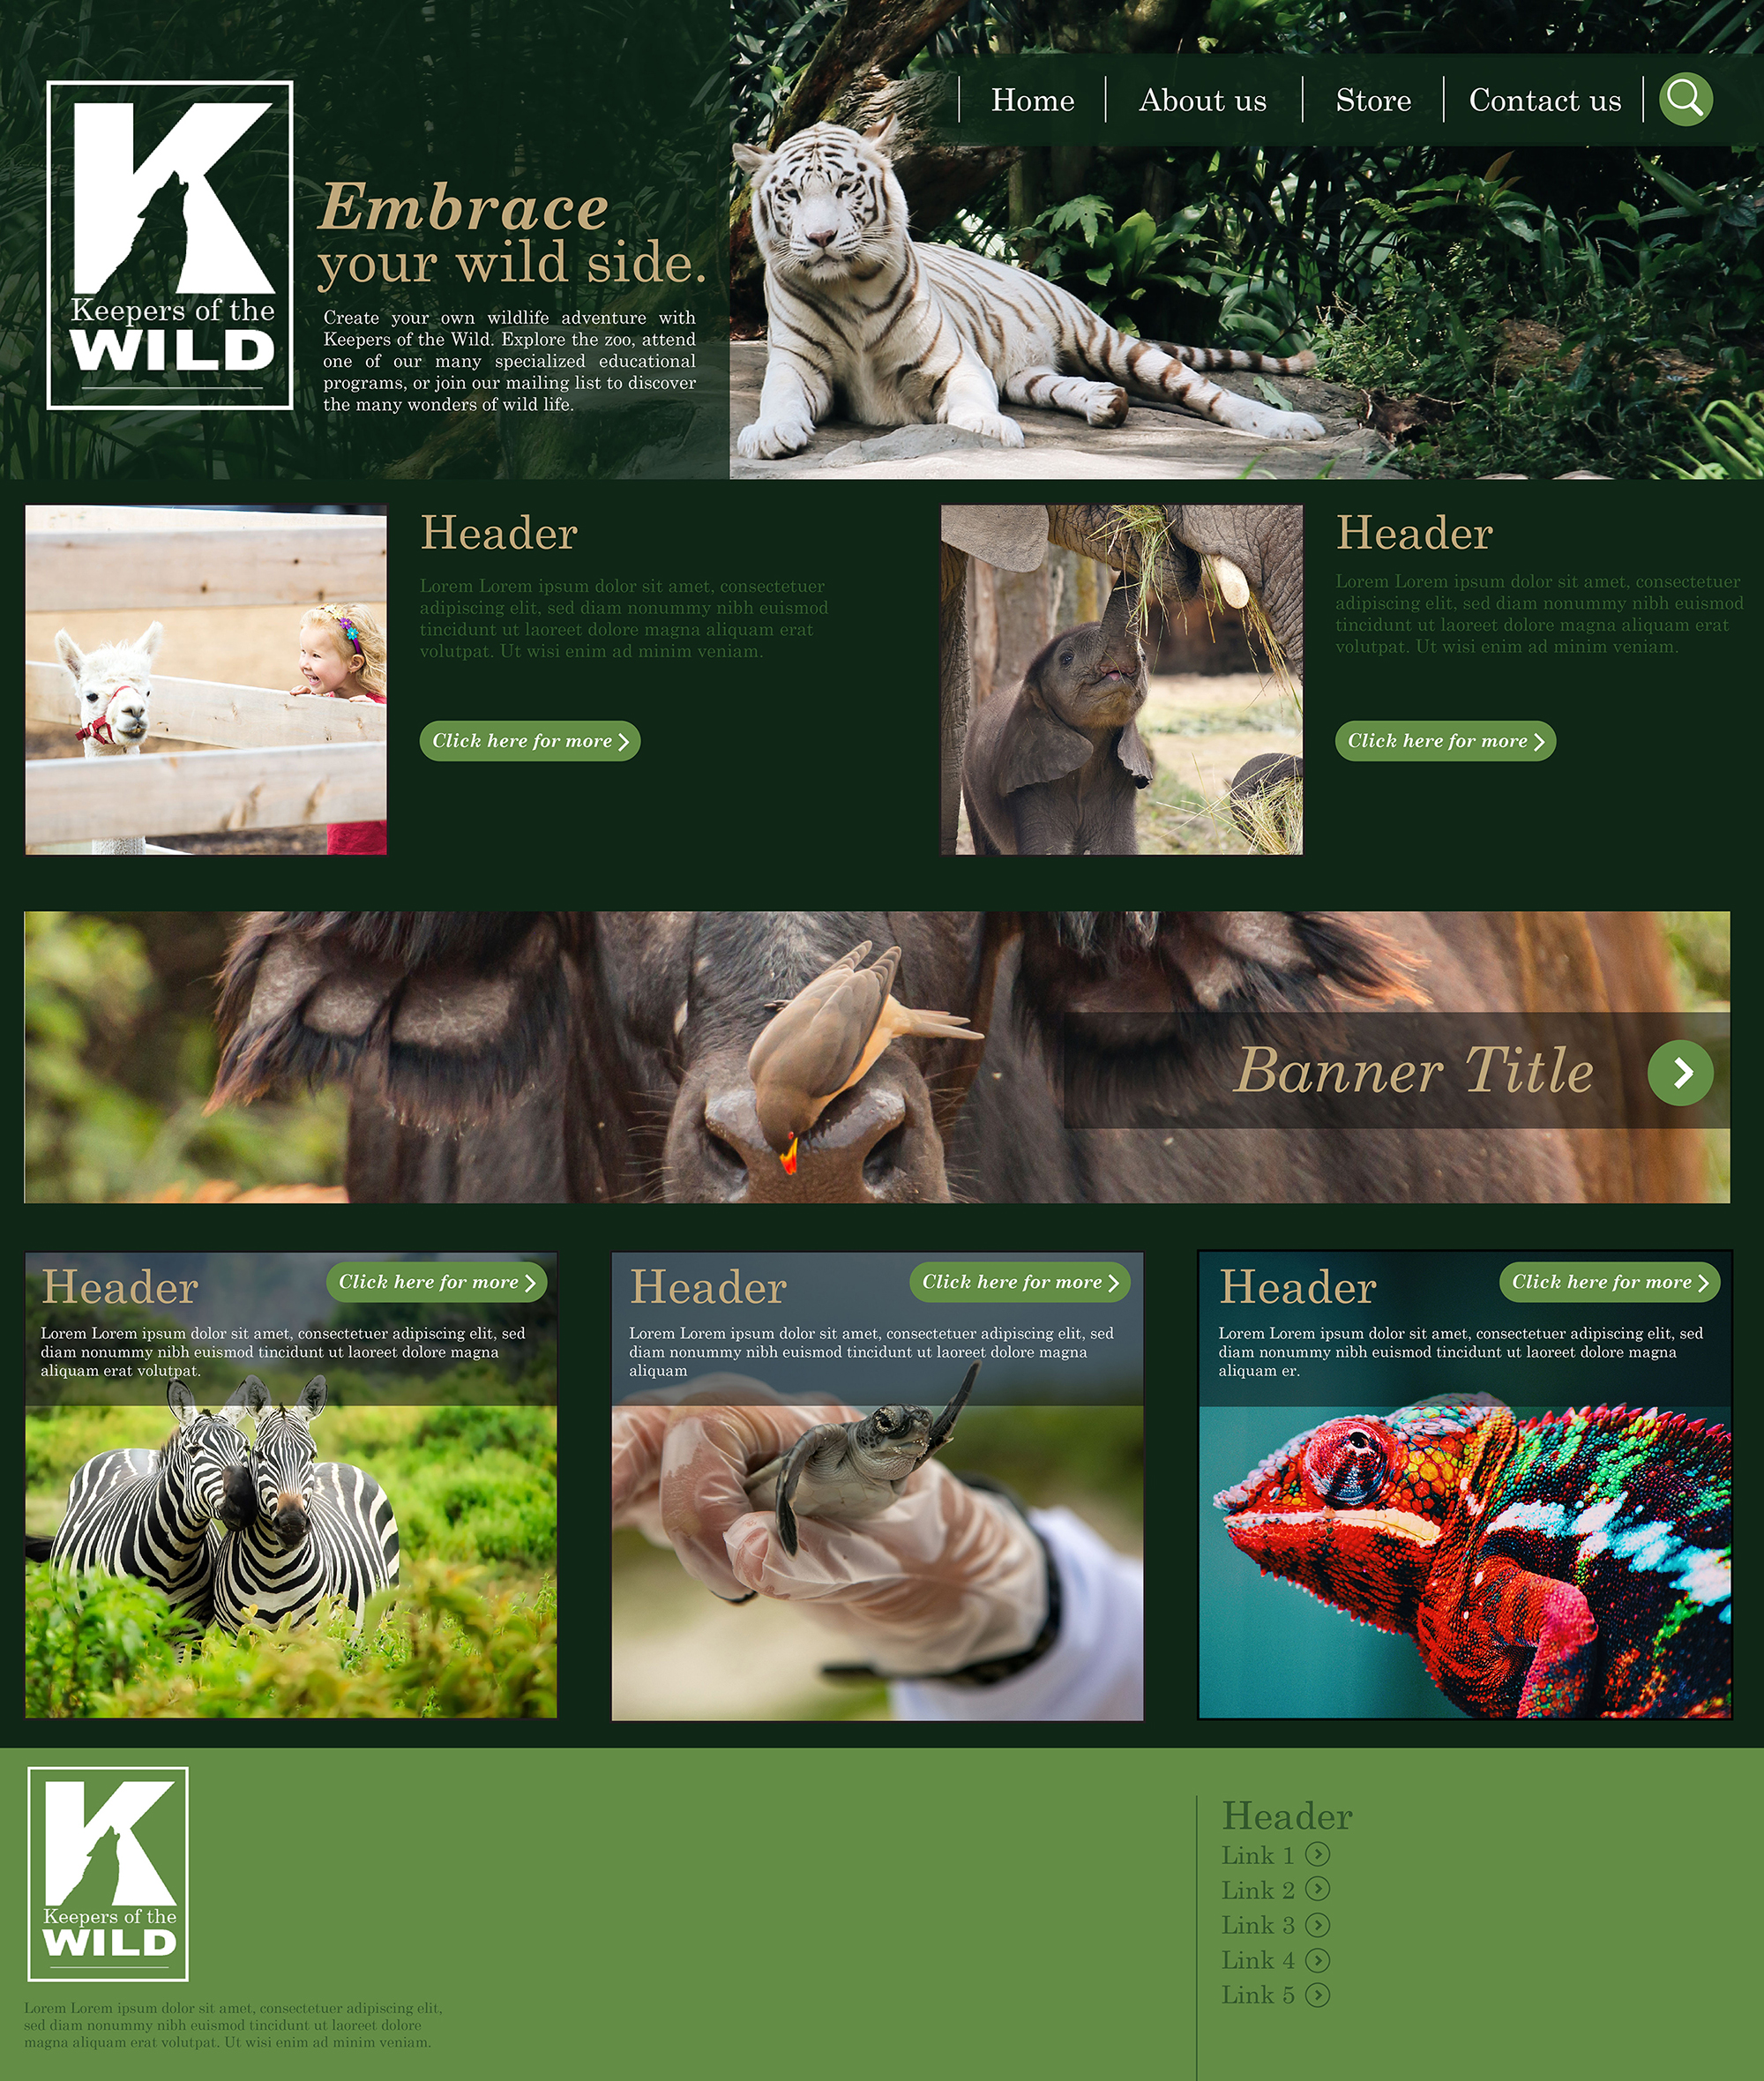 <b>Keepers of the Wild Webpage</b><br><i>Created using Illustrator.</i><br>The naturalistic colors and simple design of this zoo website homepage are utilized to emphasize the busy, colorful images used.